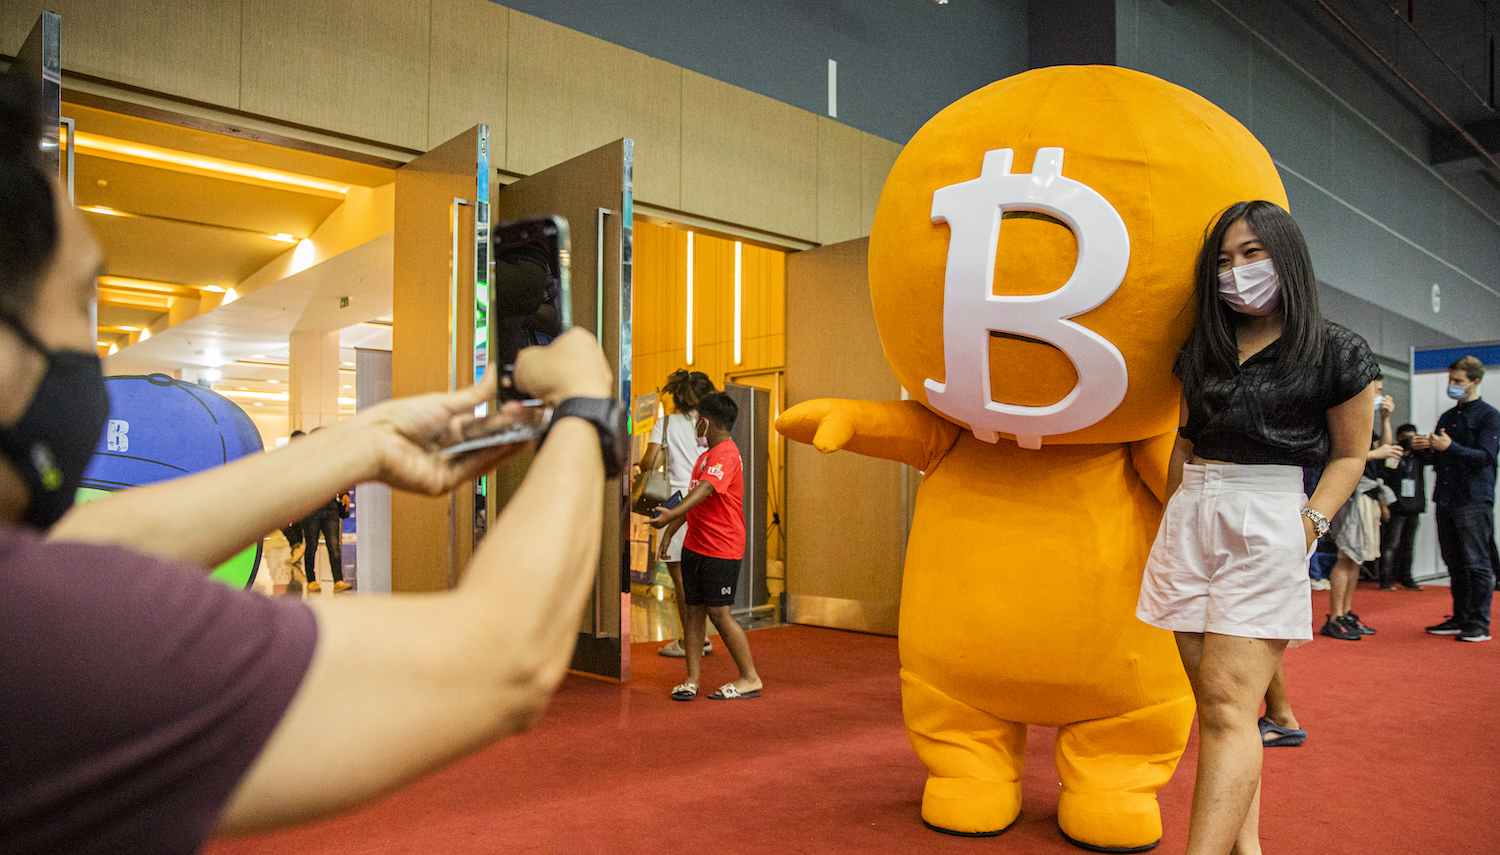 BANGKOK, THAILAND - MAY 14: A woman poses with a Bitcoin mascot during the Thailand Crypto Expo 2022 on May 14, 2022 in Bangkok, Thailand. Cryptocurrency Enthusiasts attend Thailand Crypto Expo 2022, the largest cryptocurrency exposition in Southeast Asia, at the Bangkok International Trade and Exhibition Center. Visitors learn about blockchain projects, exchanges, mining, NFT production, and gamefi technology. The exposition comes during a global market crash. (Photo by Lauren DeCicca/Getty Images)